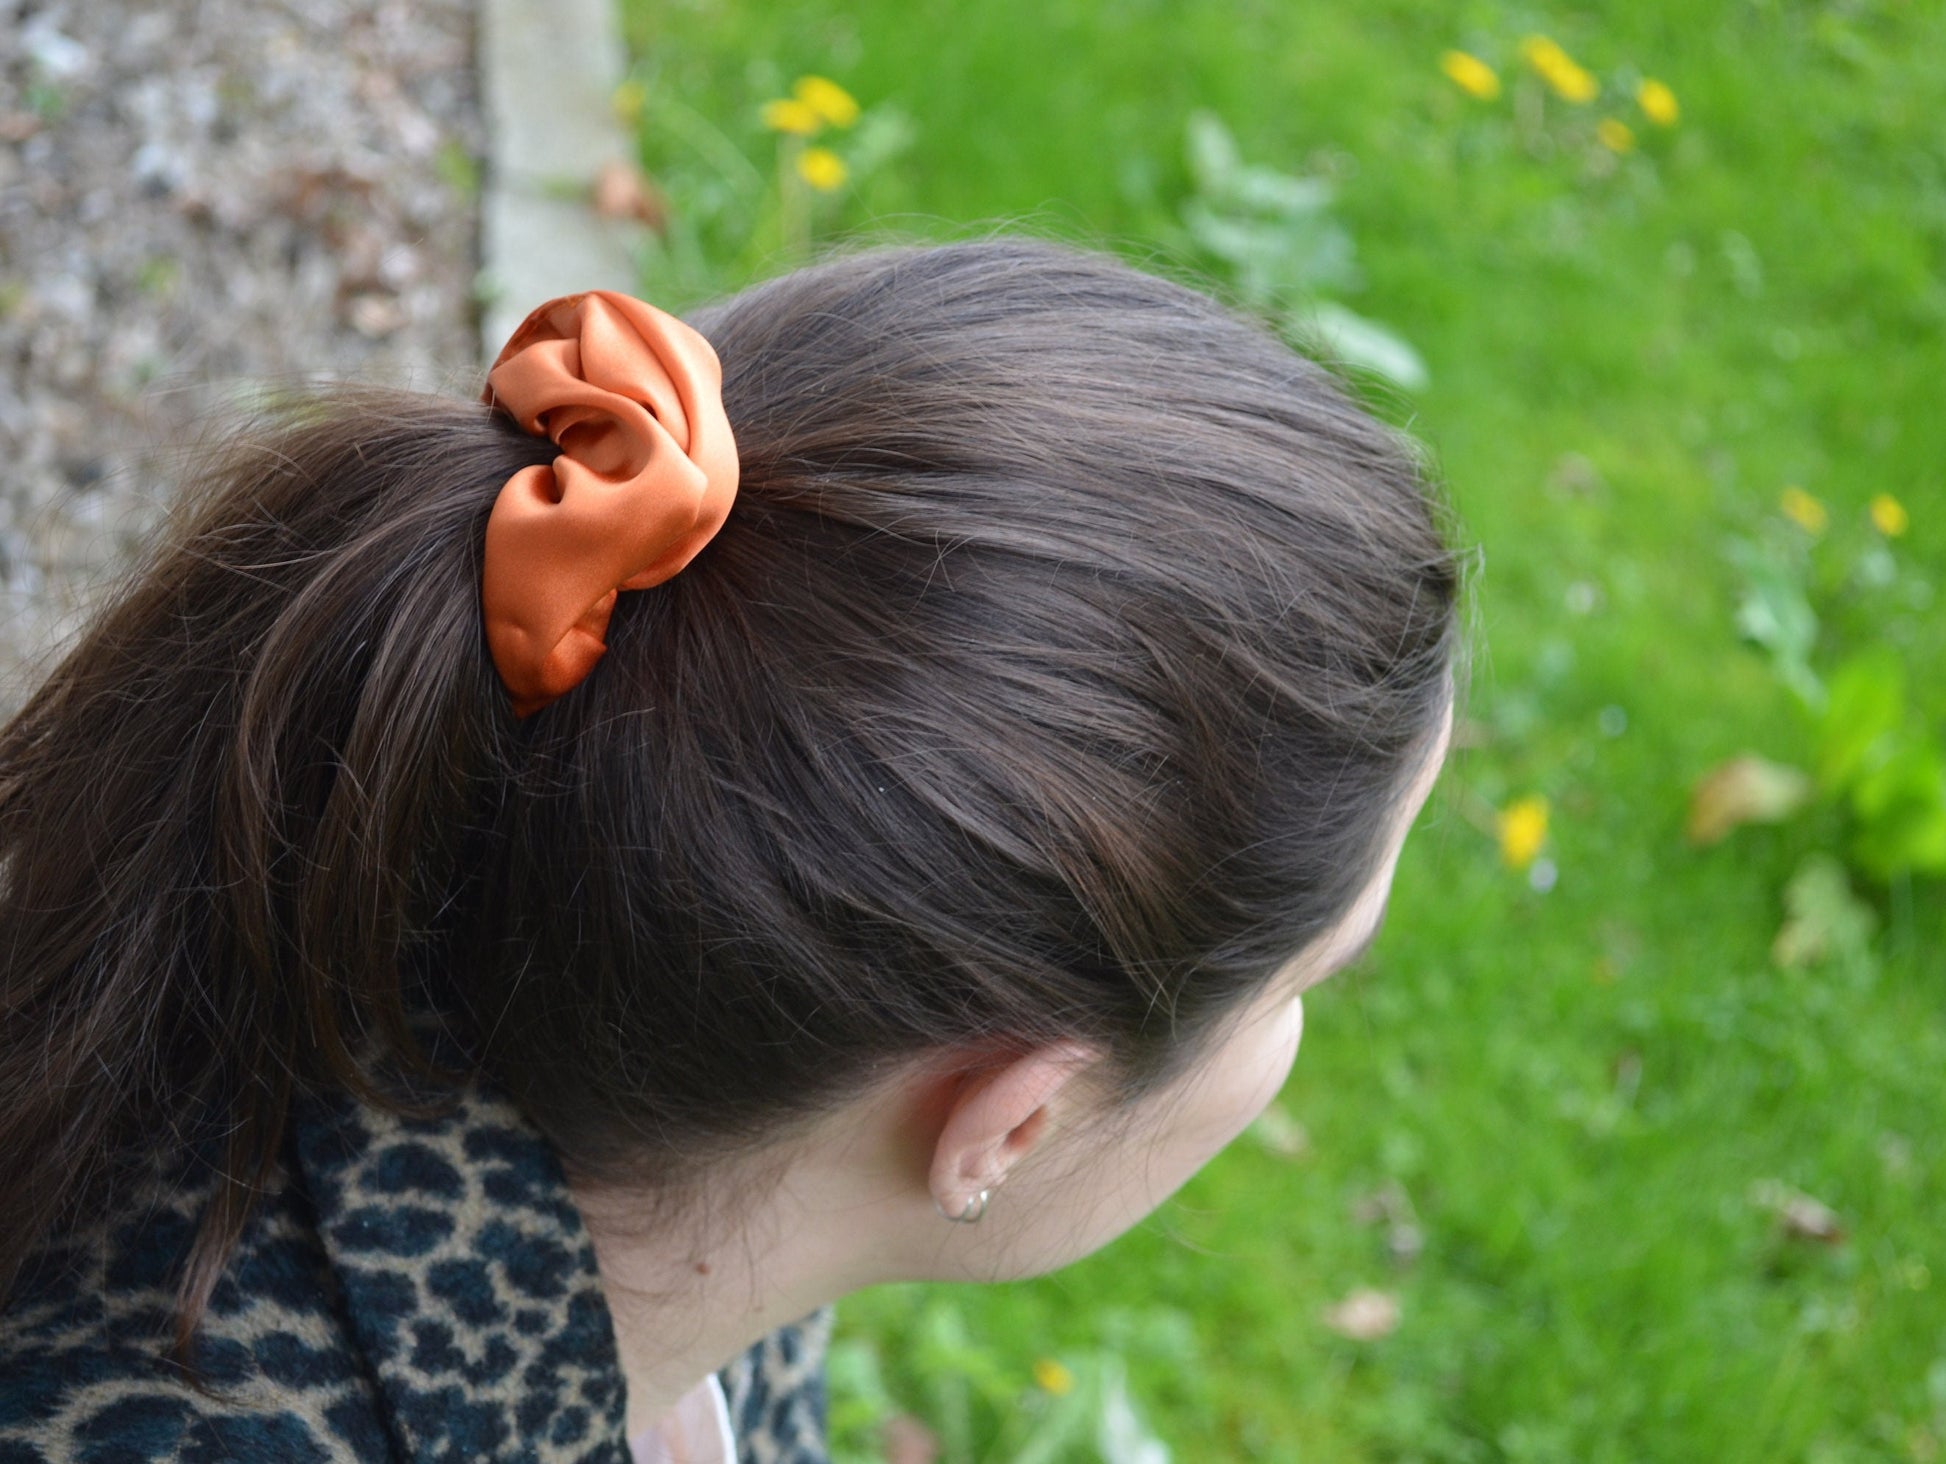 Scrunchie ADHD and Mental Health Awareness, part of profit donated to ADHD Charity, handmade gift for her, Silk hair accessory, self care